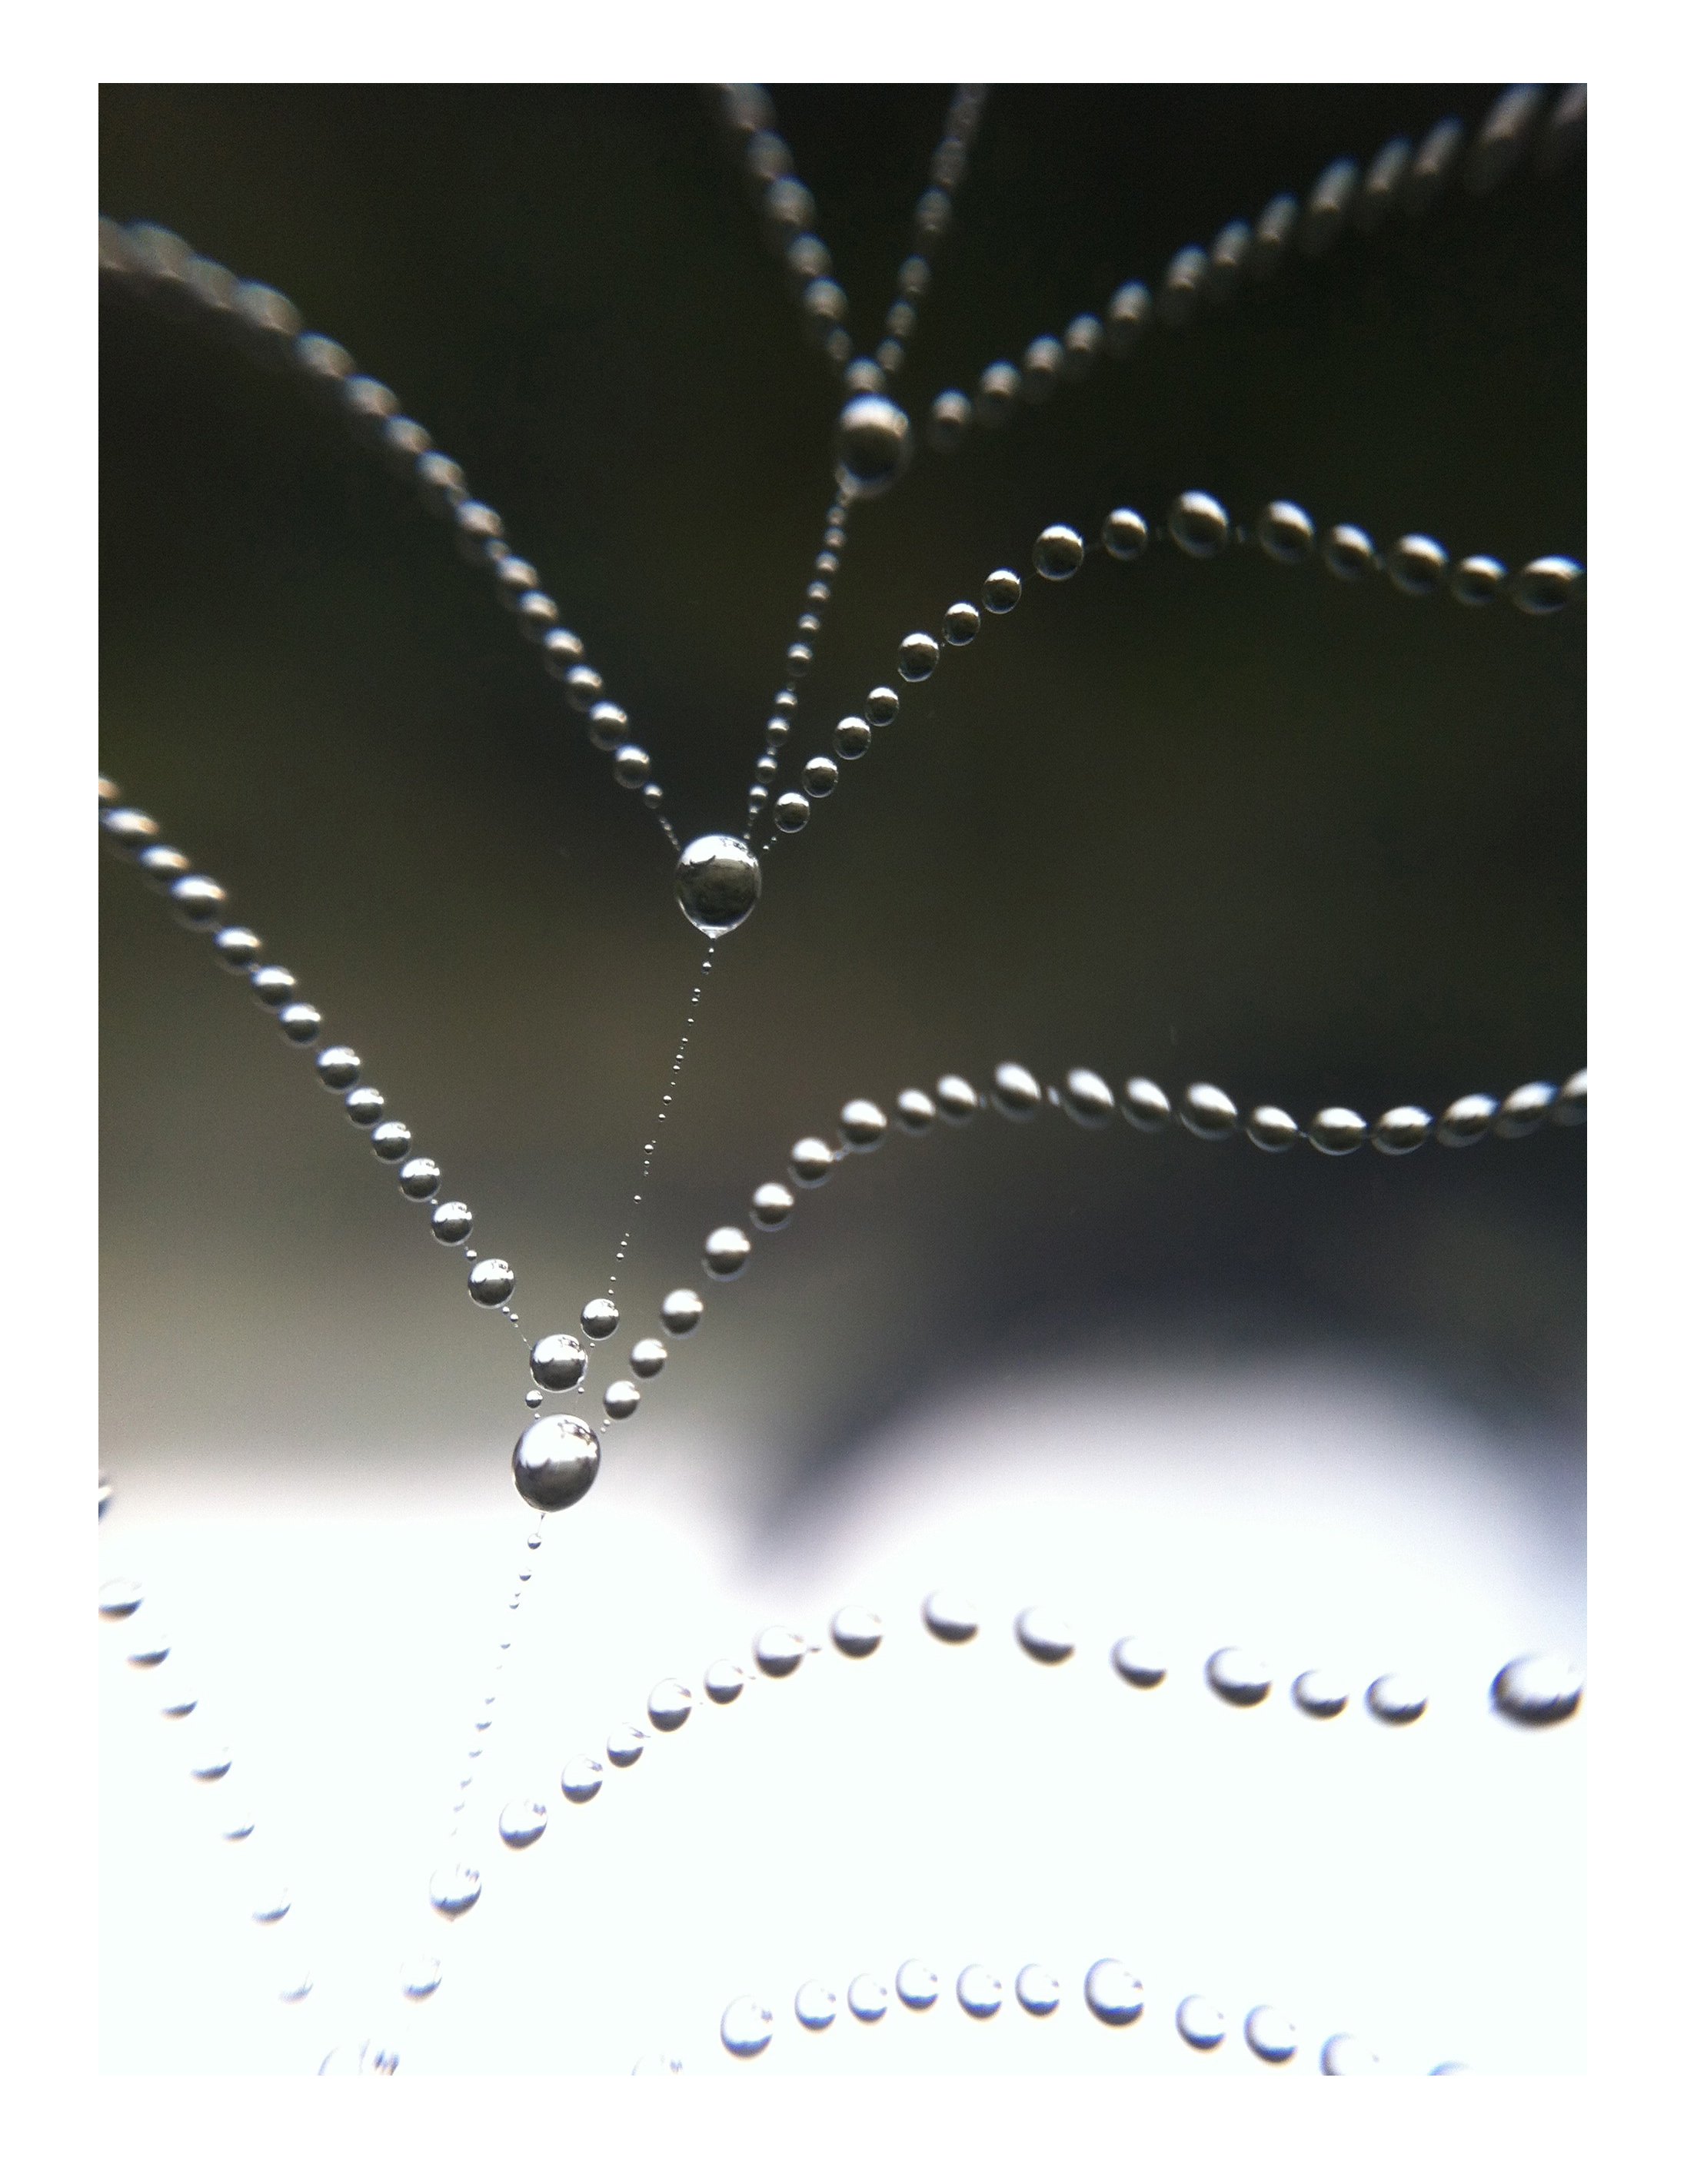 'WATER DROPLETS'